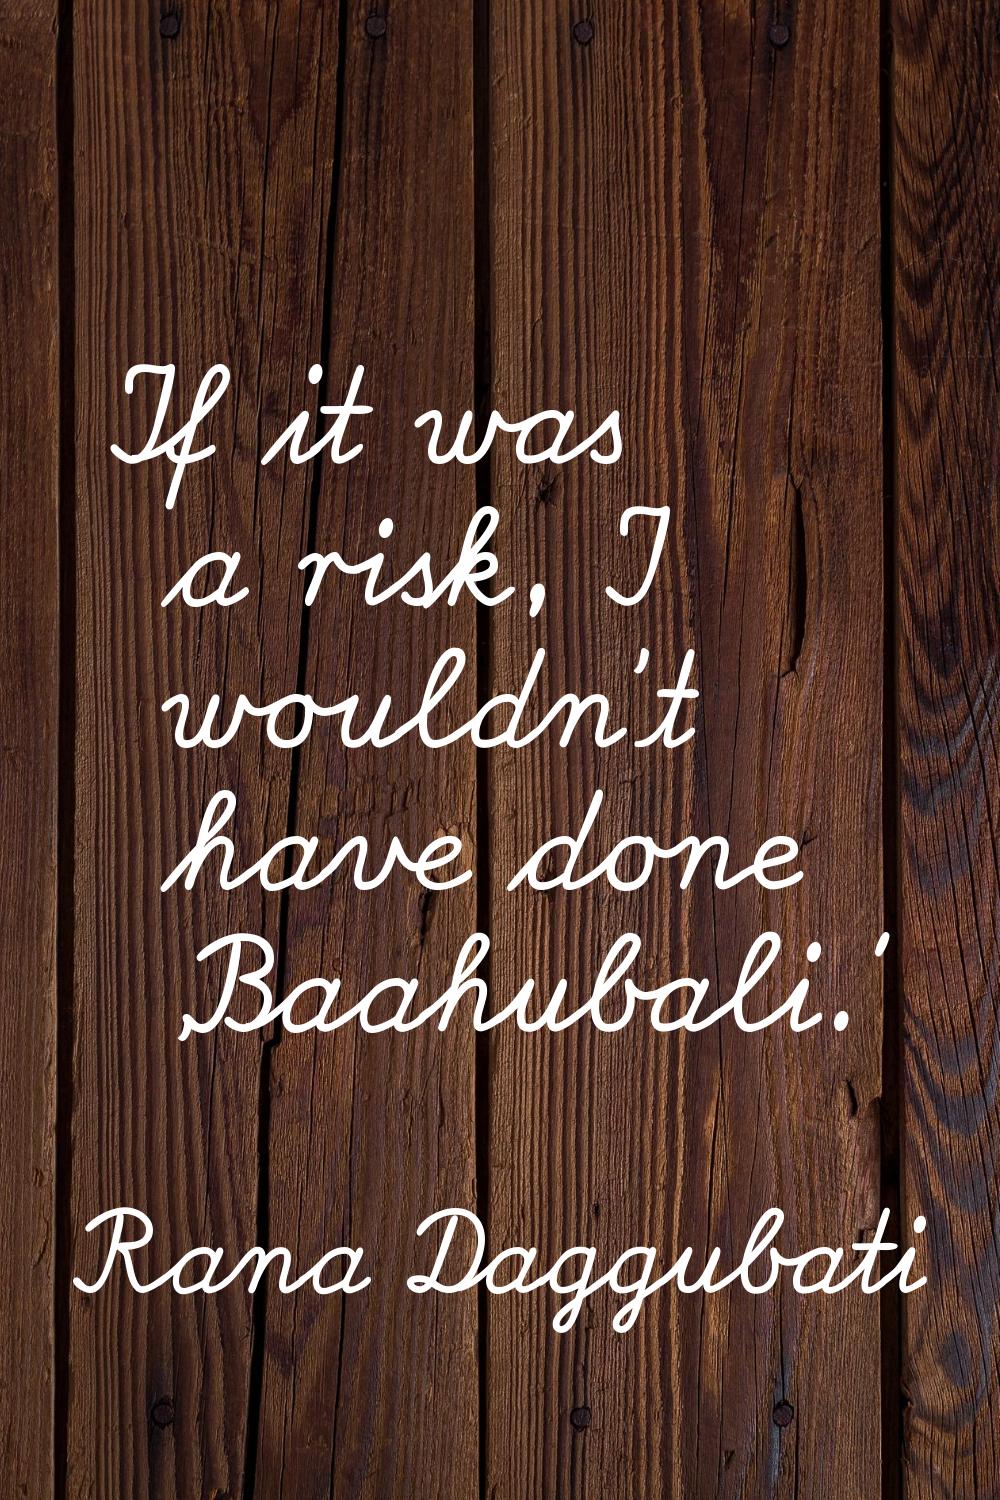 If it was a risk, I wouldn't have done 'Baahubali.'